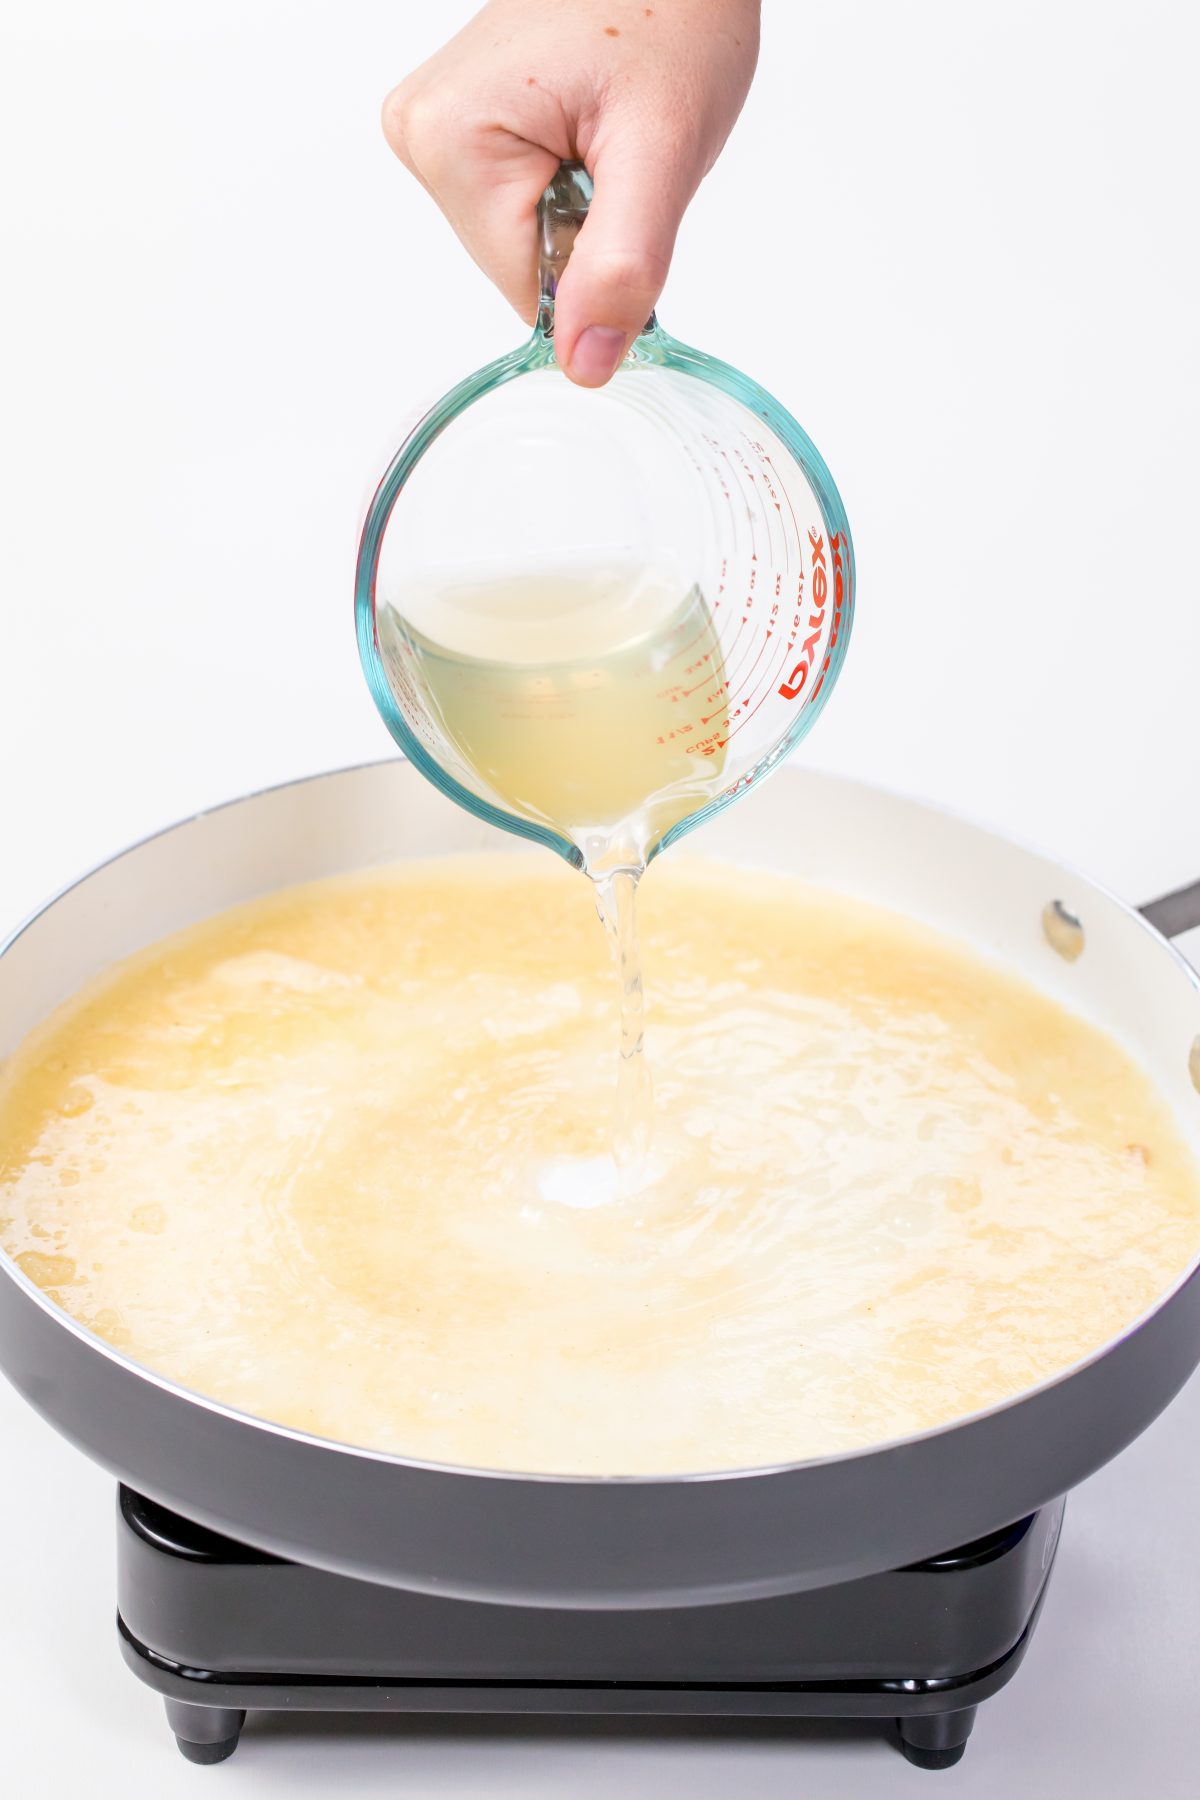 Pour chicken broth into rice flour